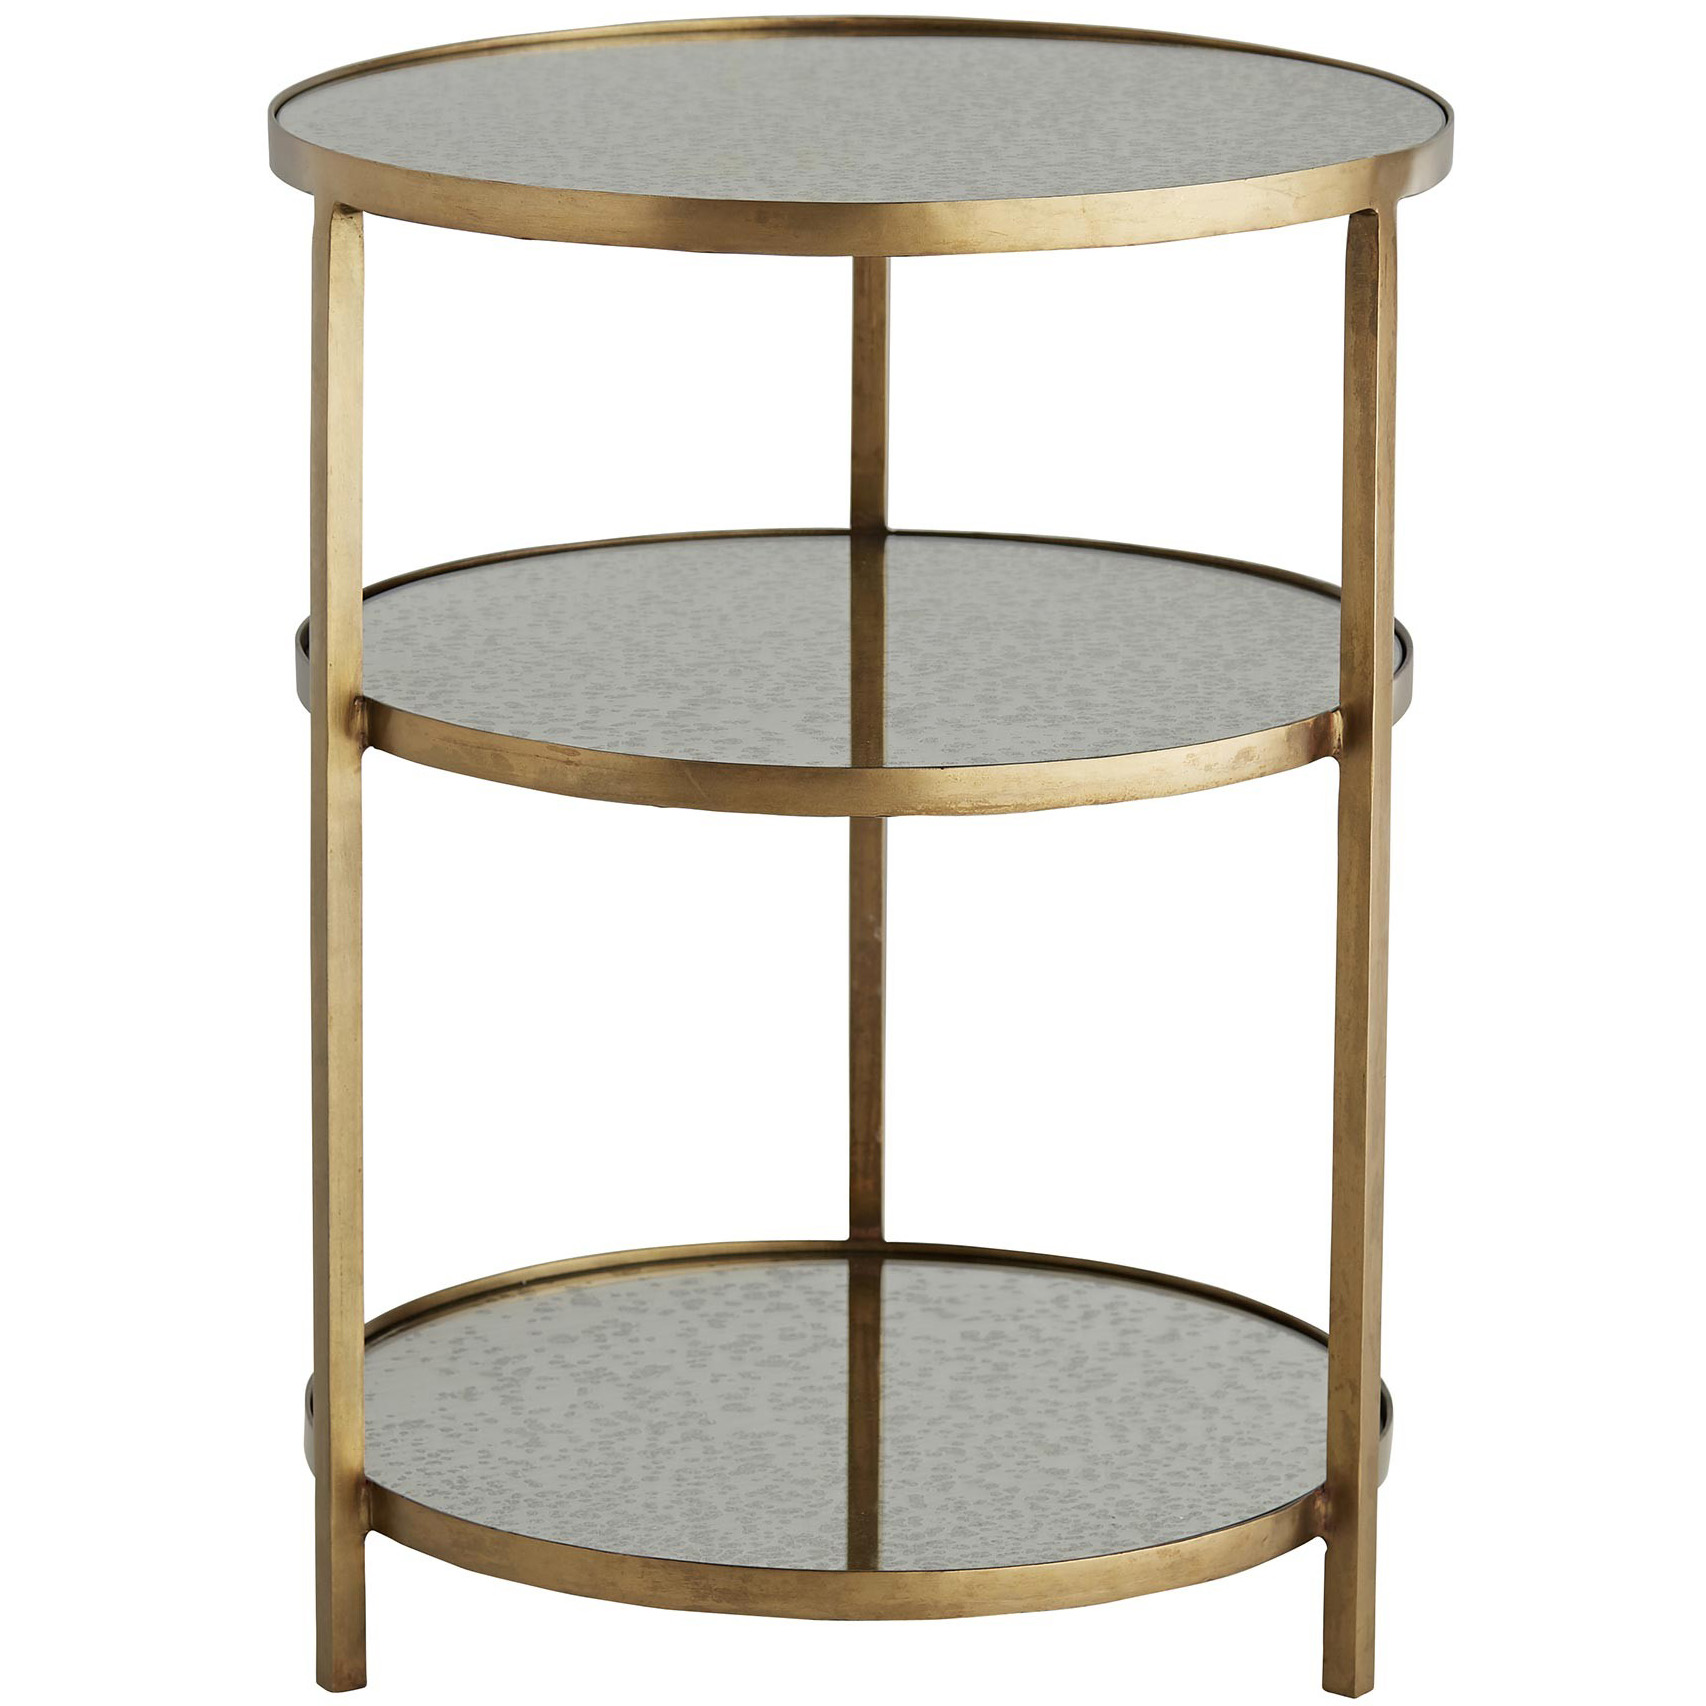 antiqued mirror side tables dandelion spell tiered metal accent table round tier iron with antique brass finished frame and vintage acrylic coffee clear console modern light legs